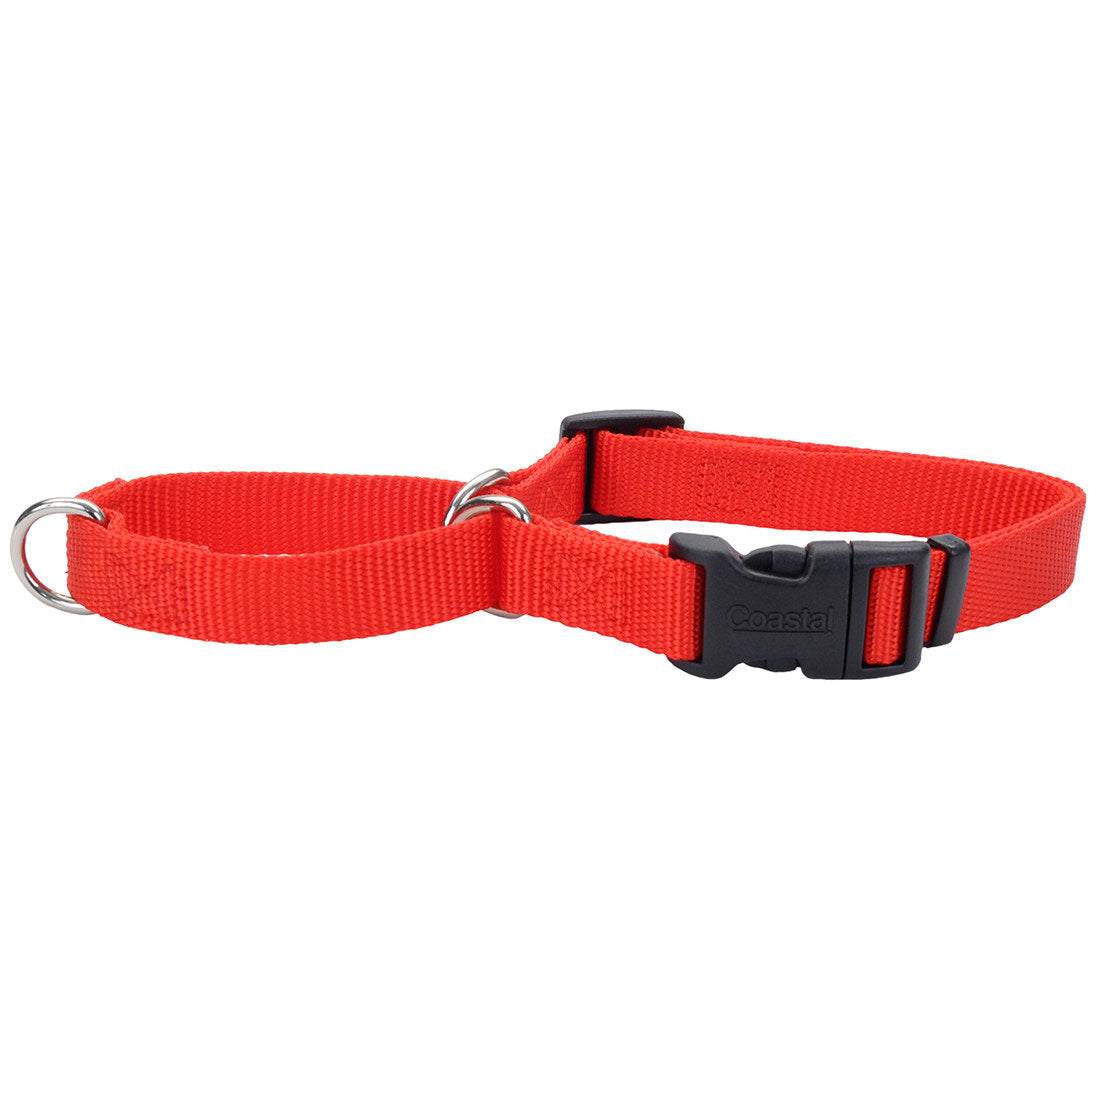 No! Slip® Martingale Adjustable Dog Collar with Buckle by Coastal, Red